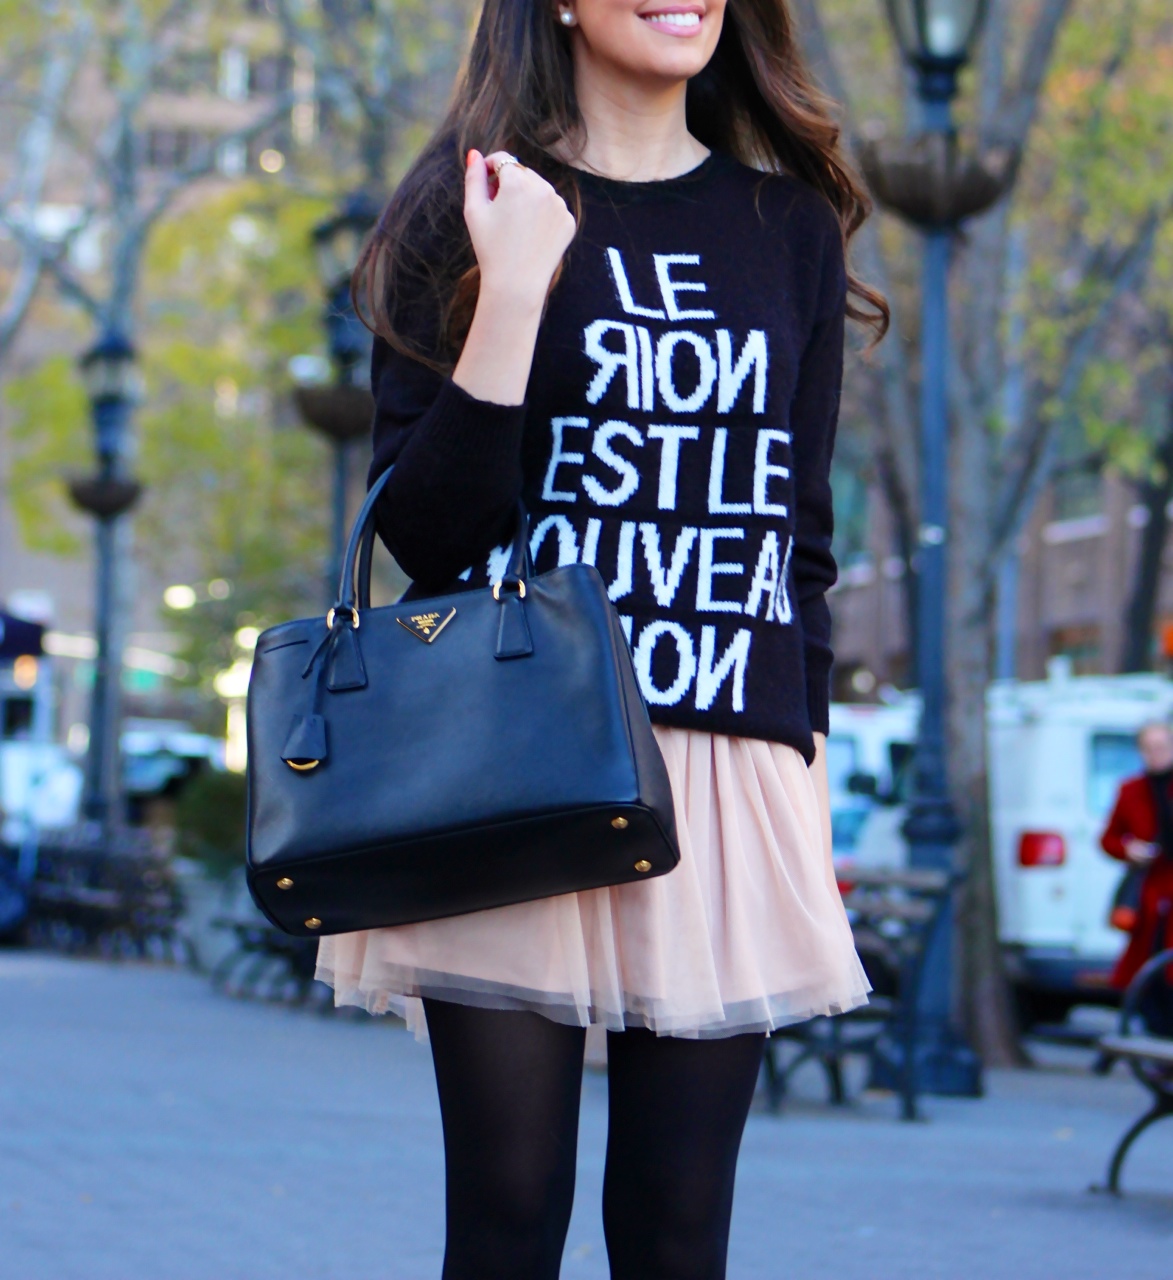 Tulle Skirt w/ oversized sweater, booties, and prada saffiano: cute winter skirt look